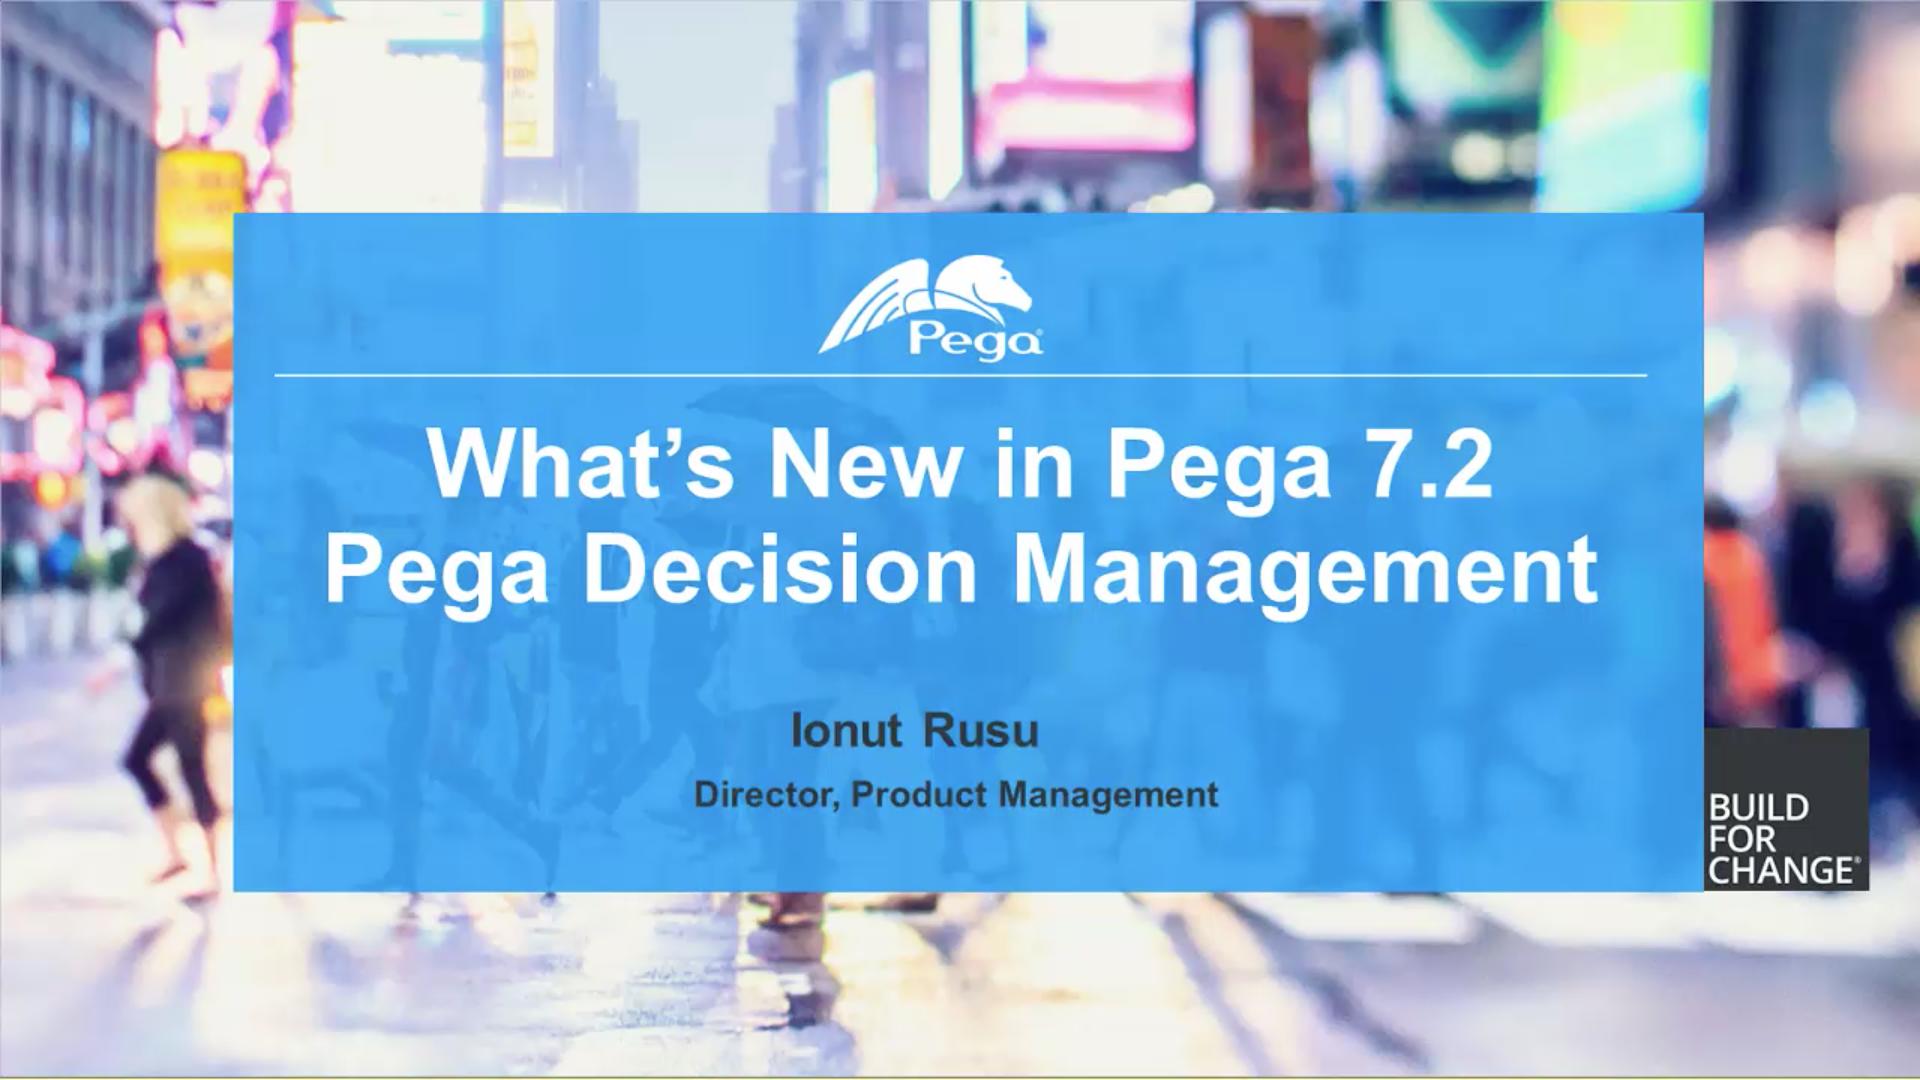 Pega 7.2 Update: What's New in Decision Management